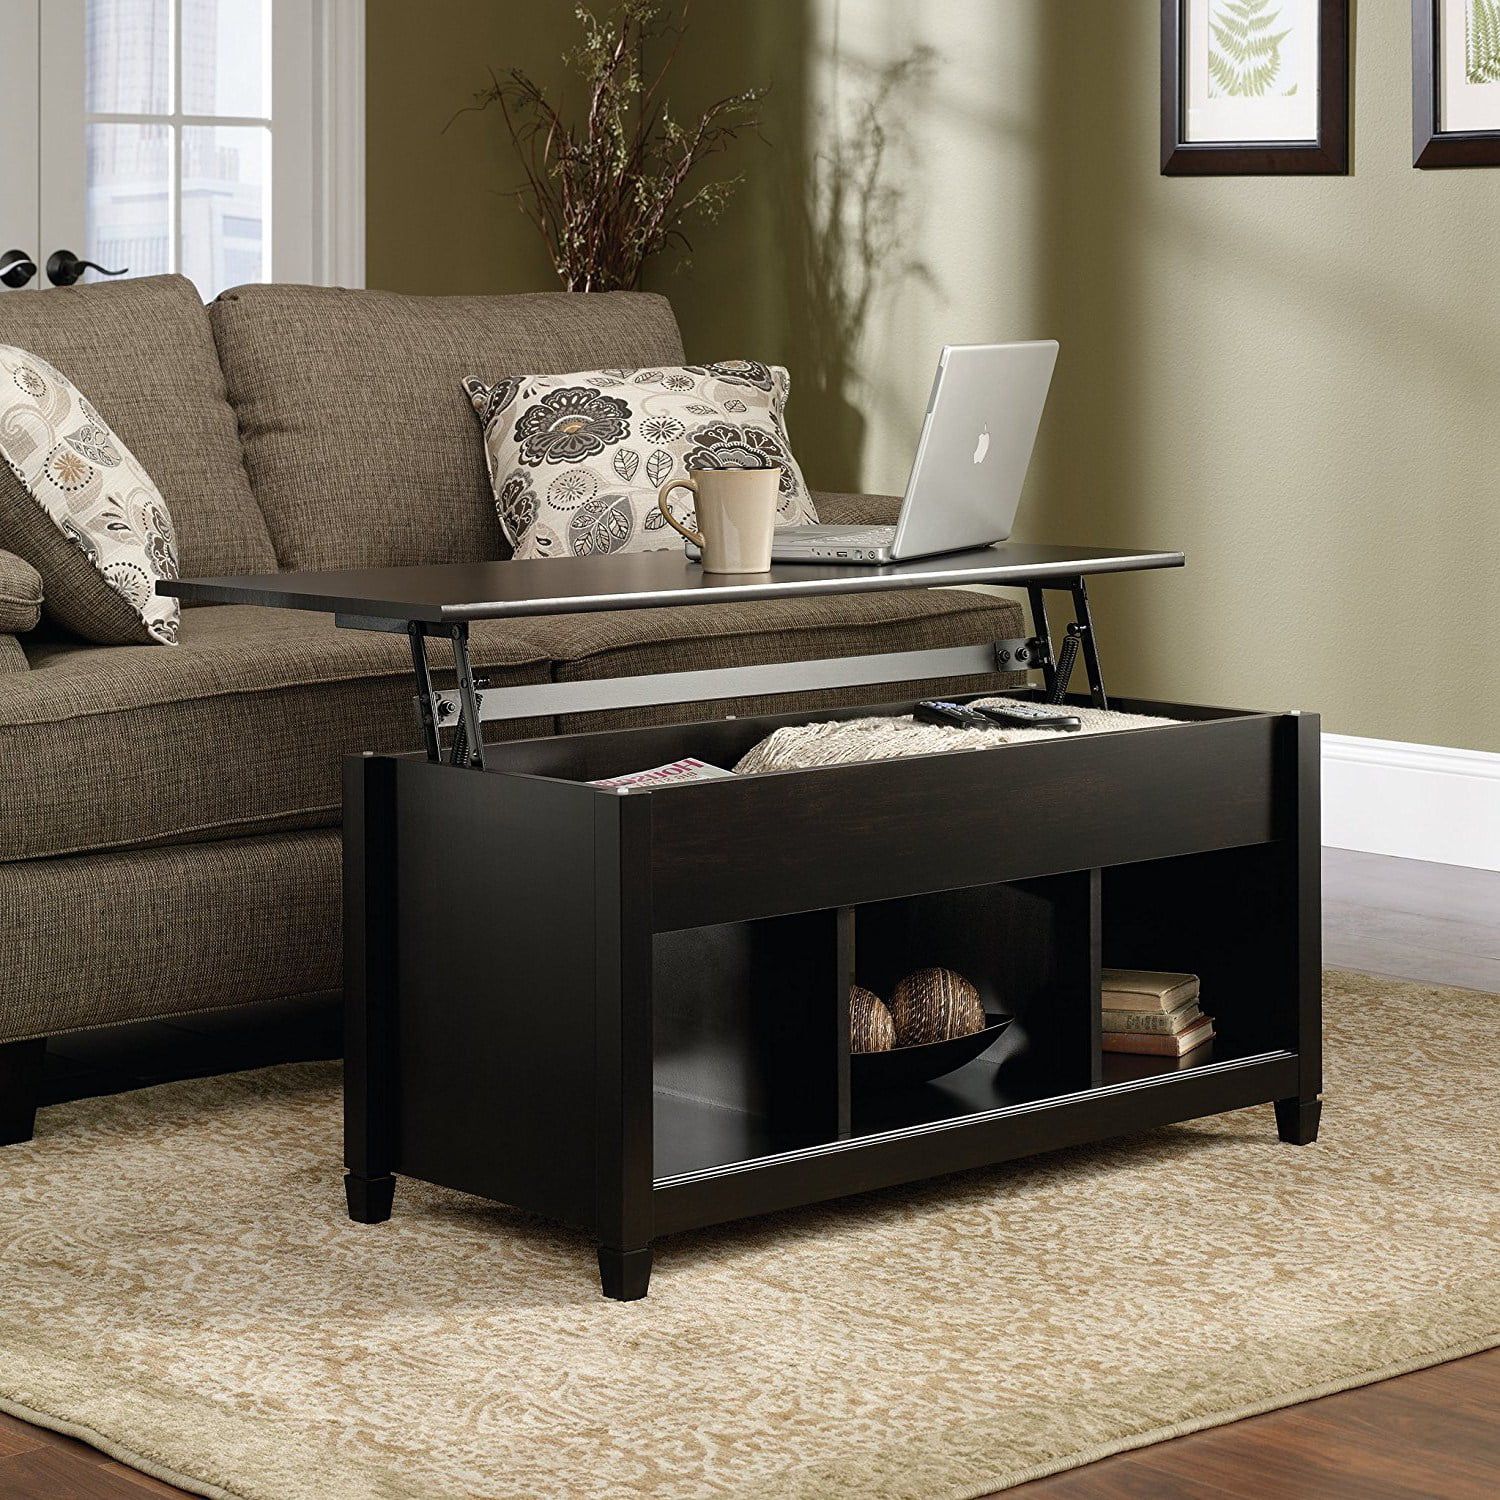 Zimtown Lift Up Top Coffee Table With Hidden Compartment End Rectangle Regarding Lift Top Coffee Tables With Shelves (Gallery 19 of 20)